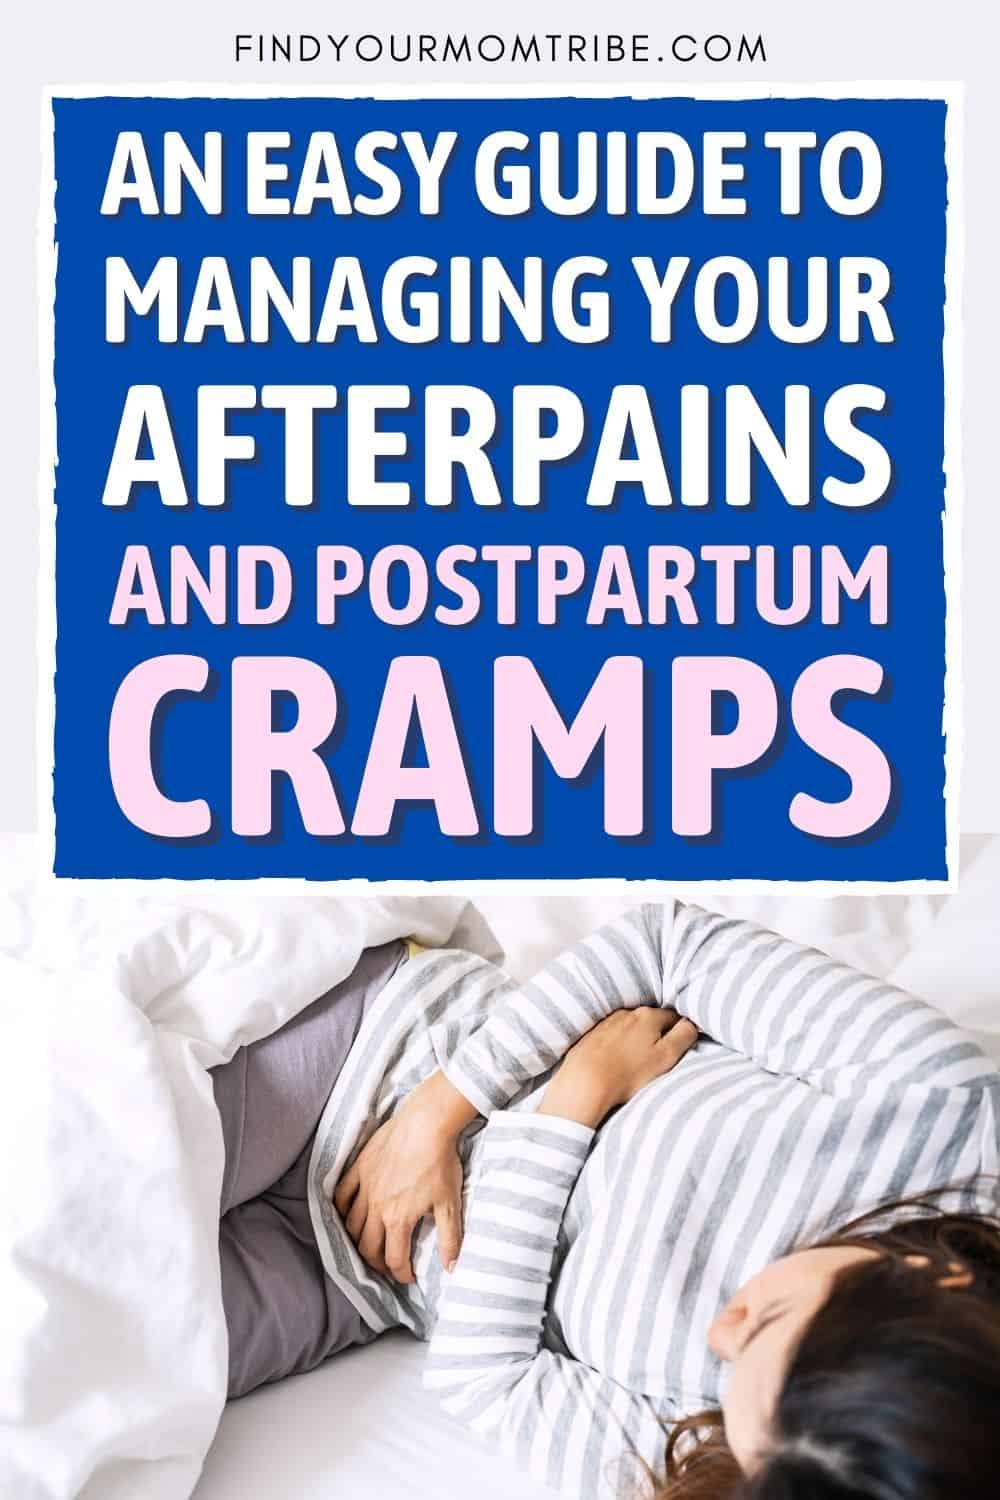 An Easy Guide To Managing Your Afterpains and Postpartum Cramps